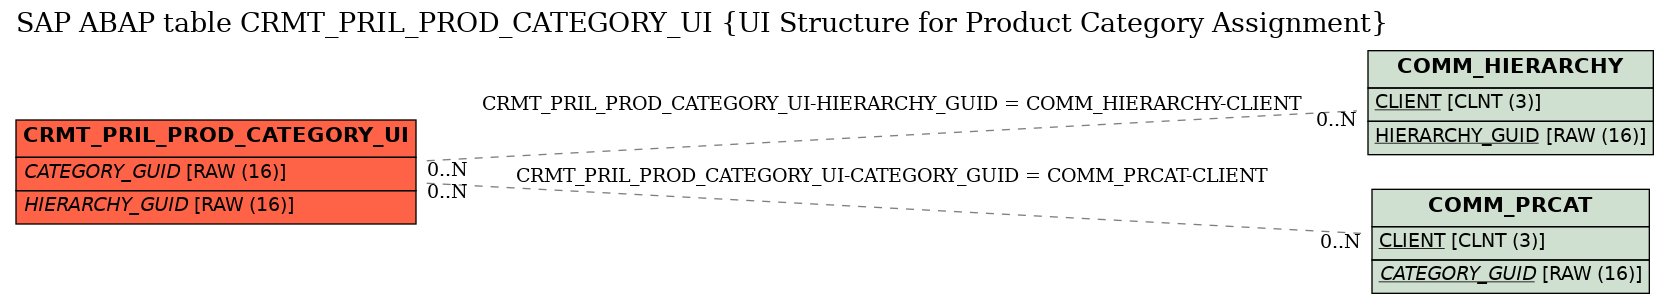 E-R Diagram for table CRMT_PRIL_PROD_CATEGORY_UI (UI Structure for Product Category Assignment)